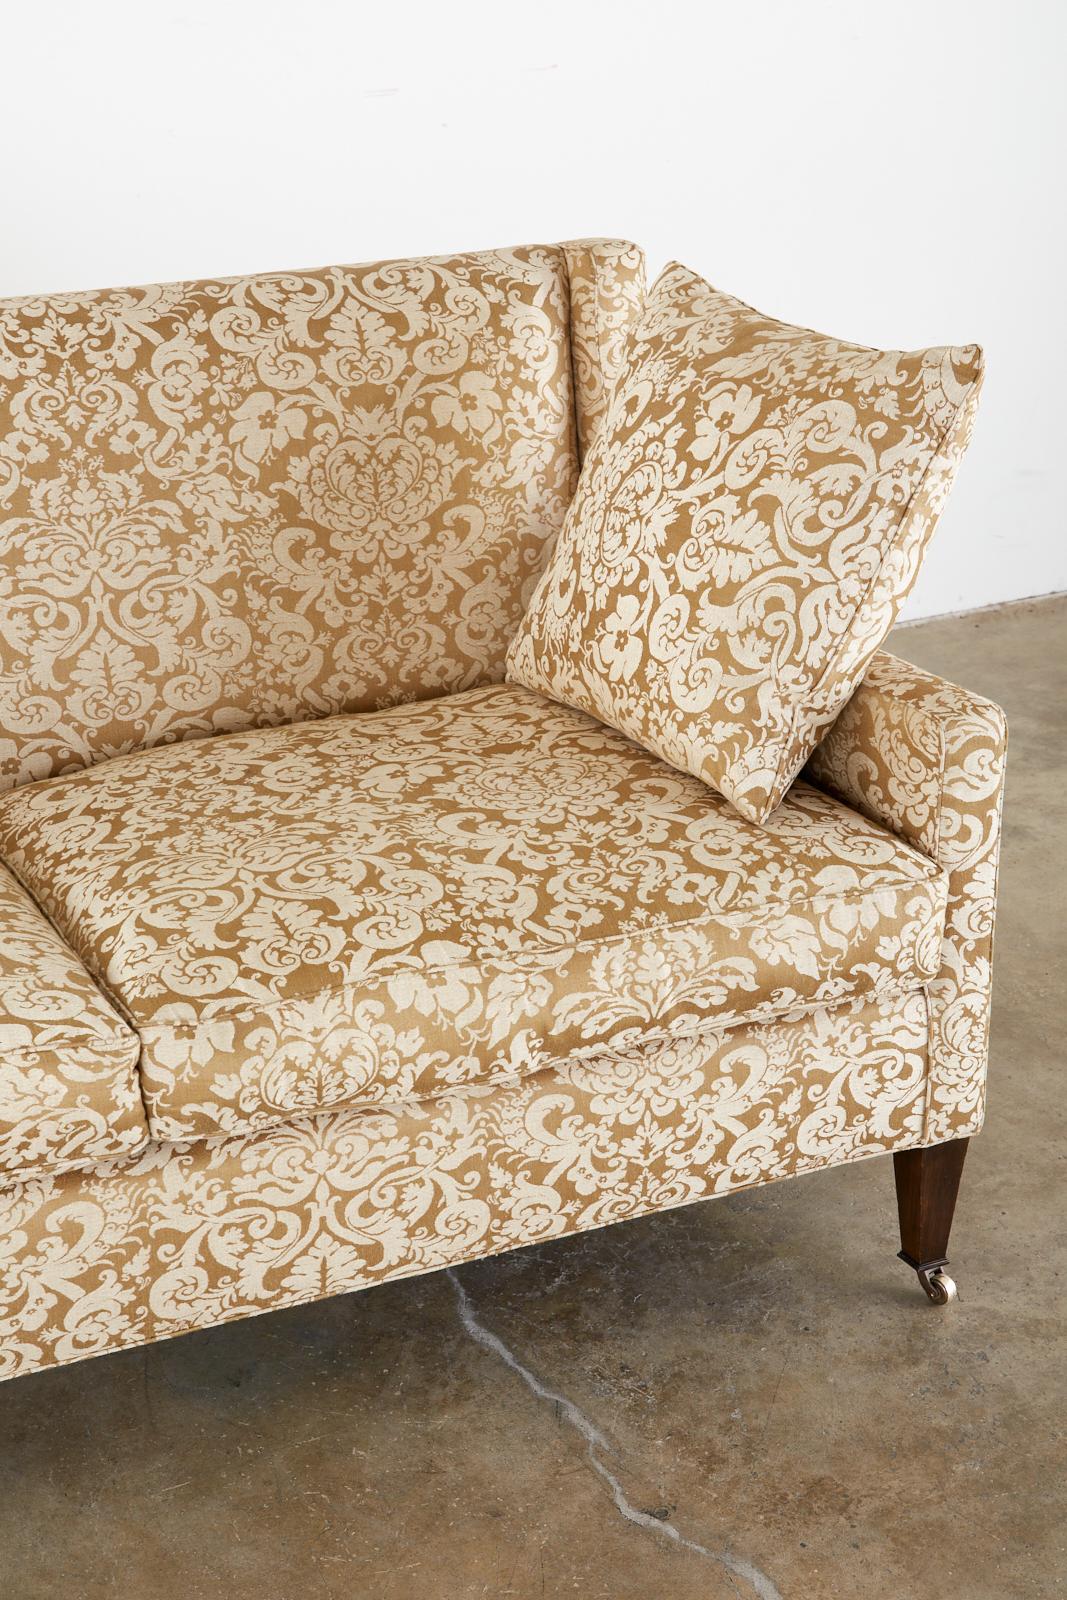 Hardwood Michael Taylor Settee with Fortuny Glicine Style Upholstery